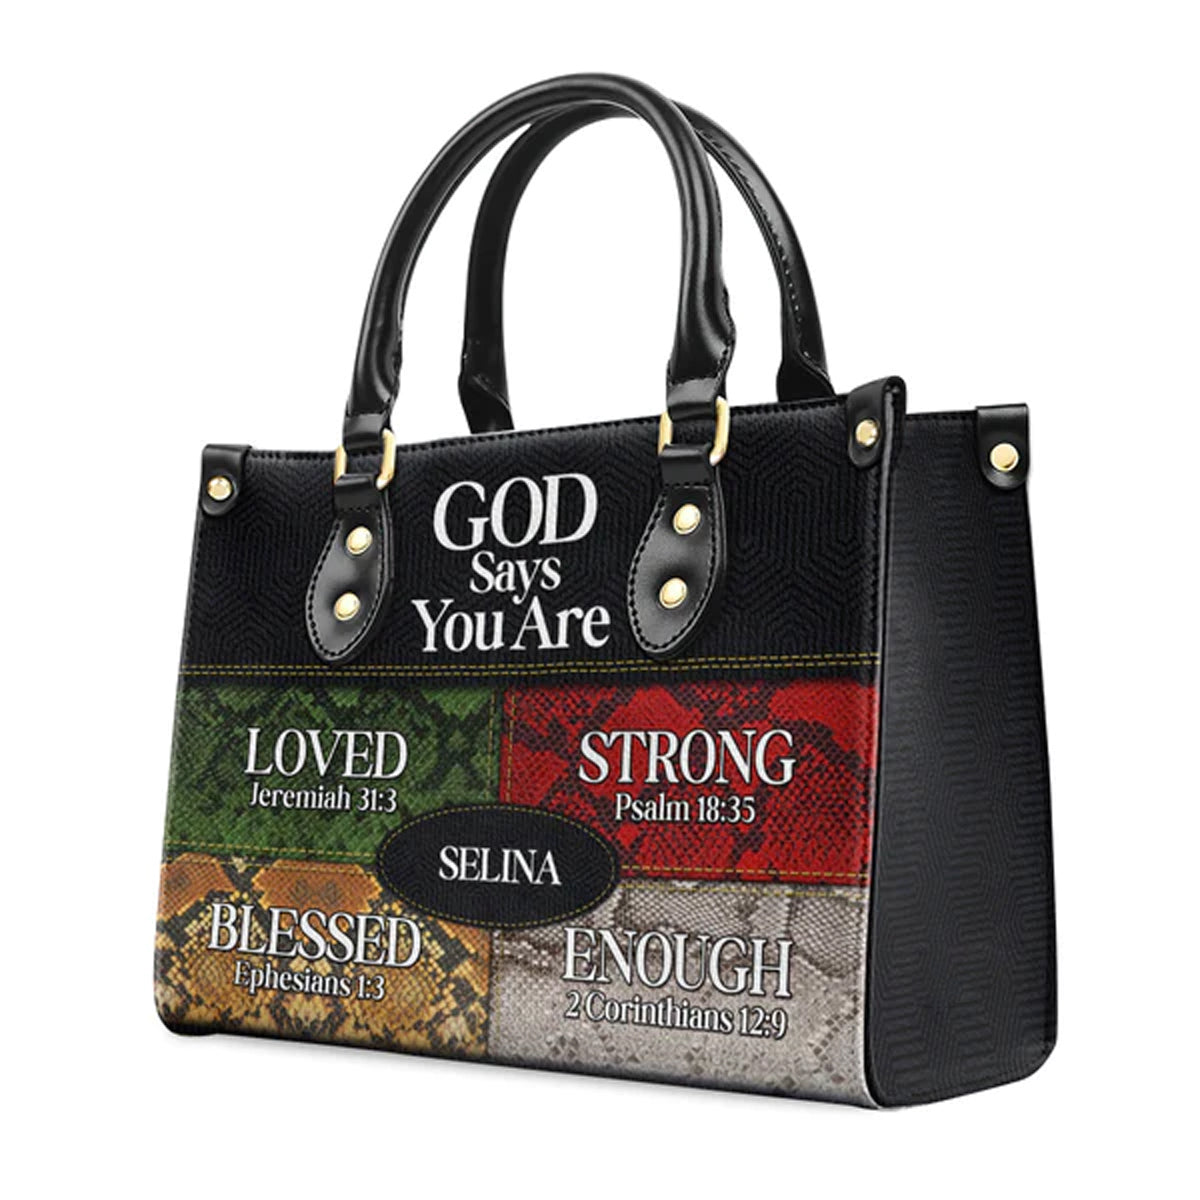 Christianartbag Handbags, God Says You Are Love Strong Blessed Enough Leather Bags, Personalized Bags, Gifts for Women, Christmas Gift, CABLTB09290723. - Christian Art Bag